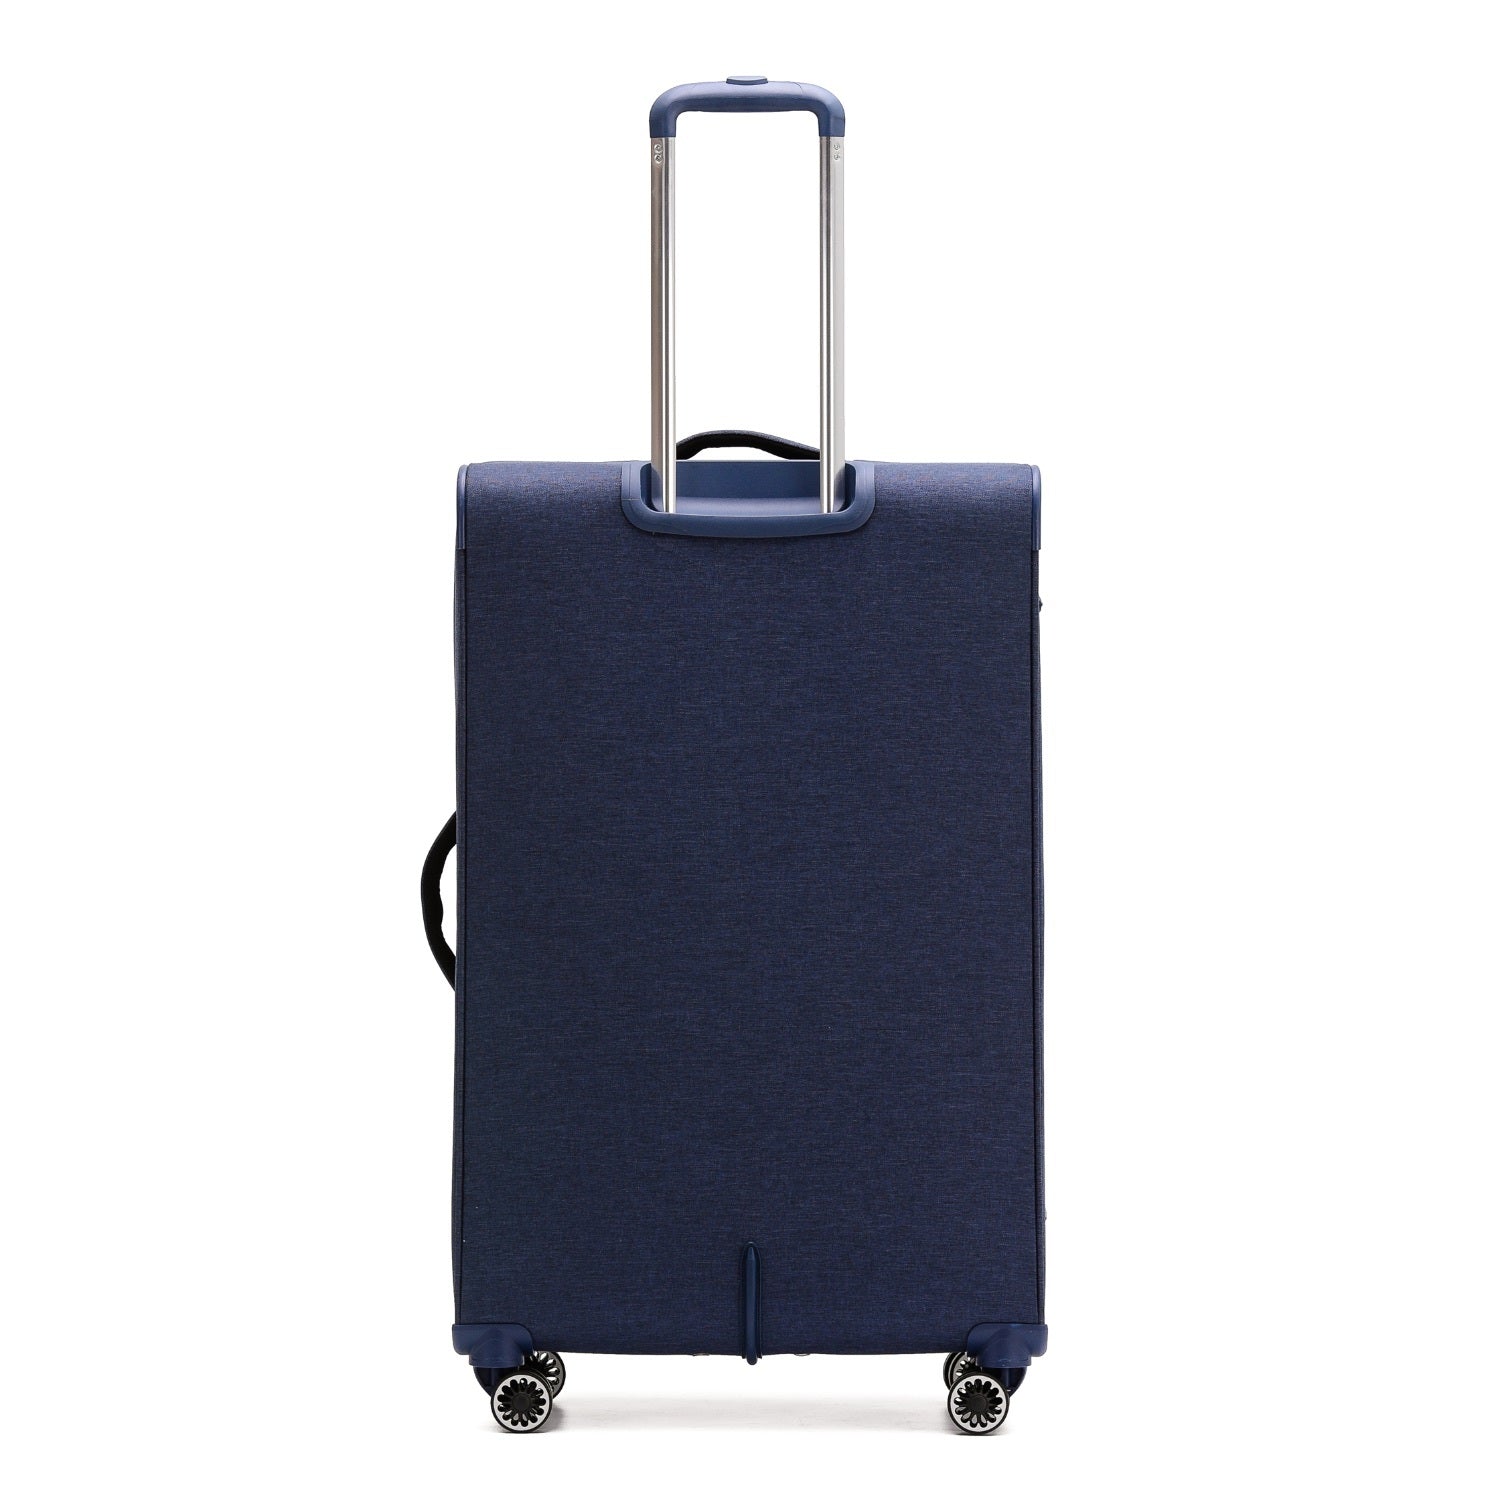 Qantas - QF400 81cm Large Adelaide Soft sided spinner - Navy-3